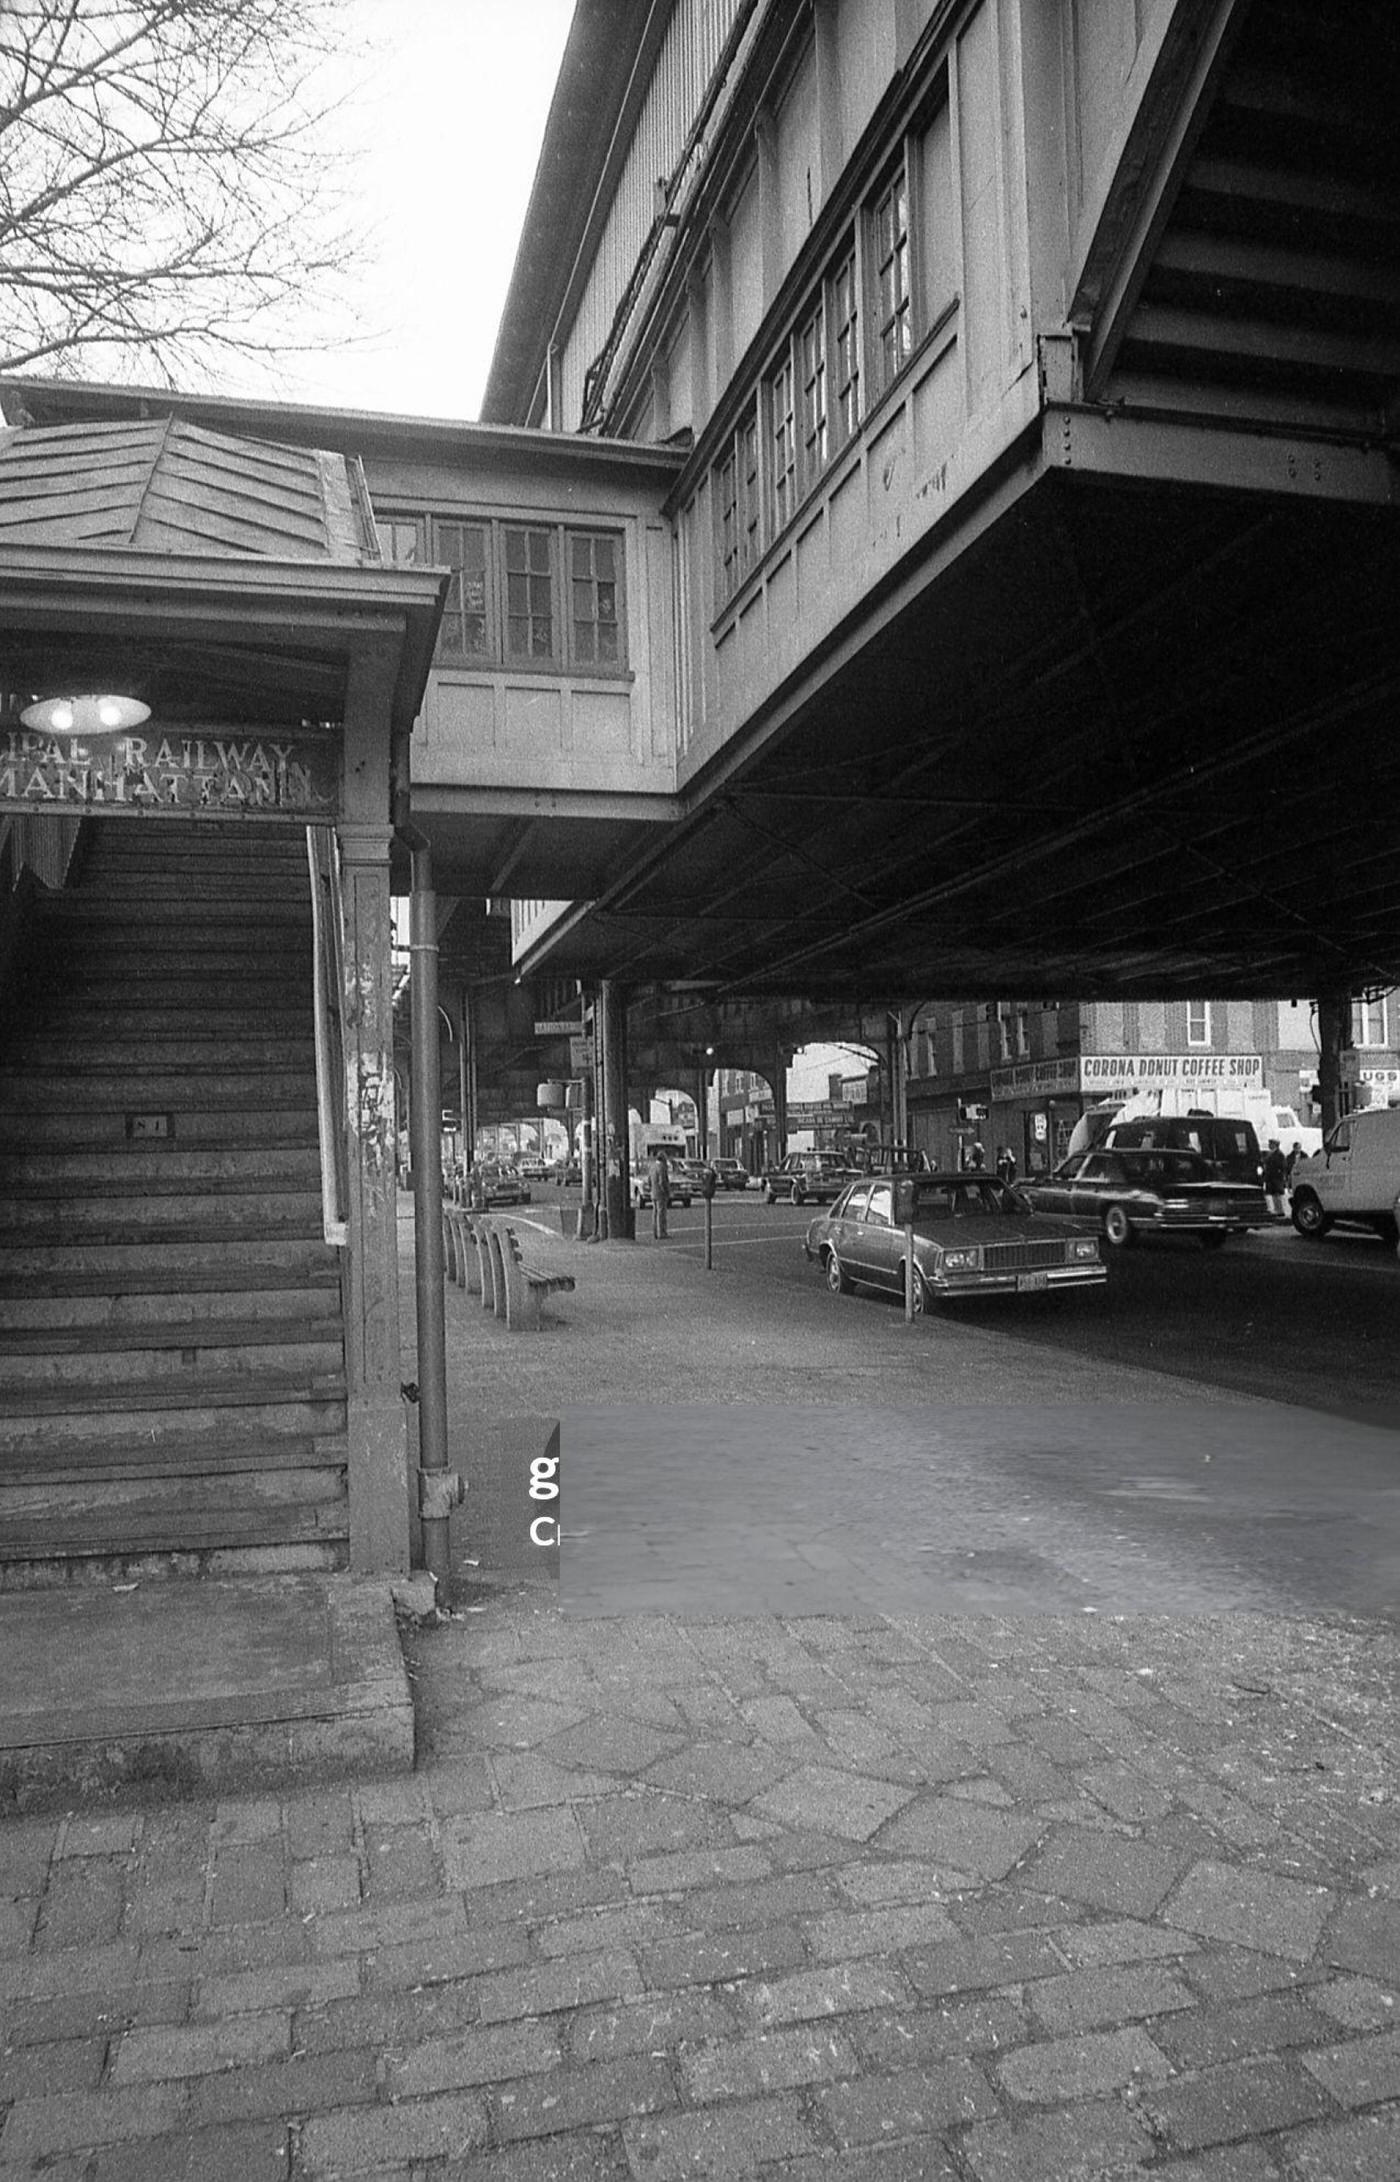 A Staircase Leads To The Elevated Subway Line At The Intersection Of Roosevelt Avenue And National Street In Corona, Queens, 1982.